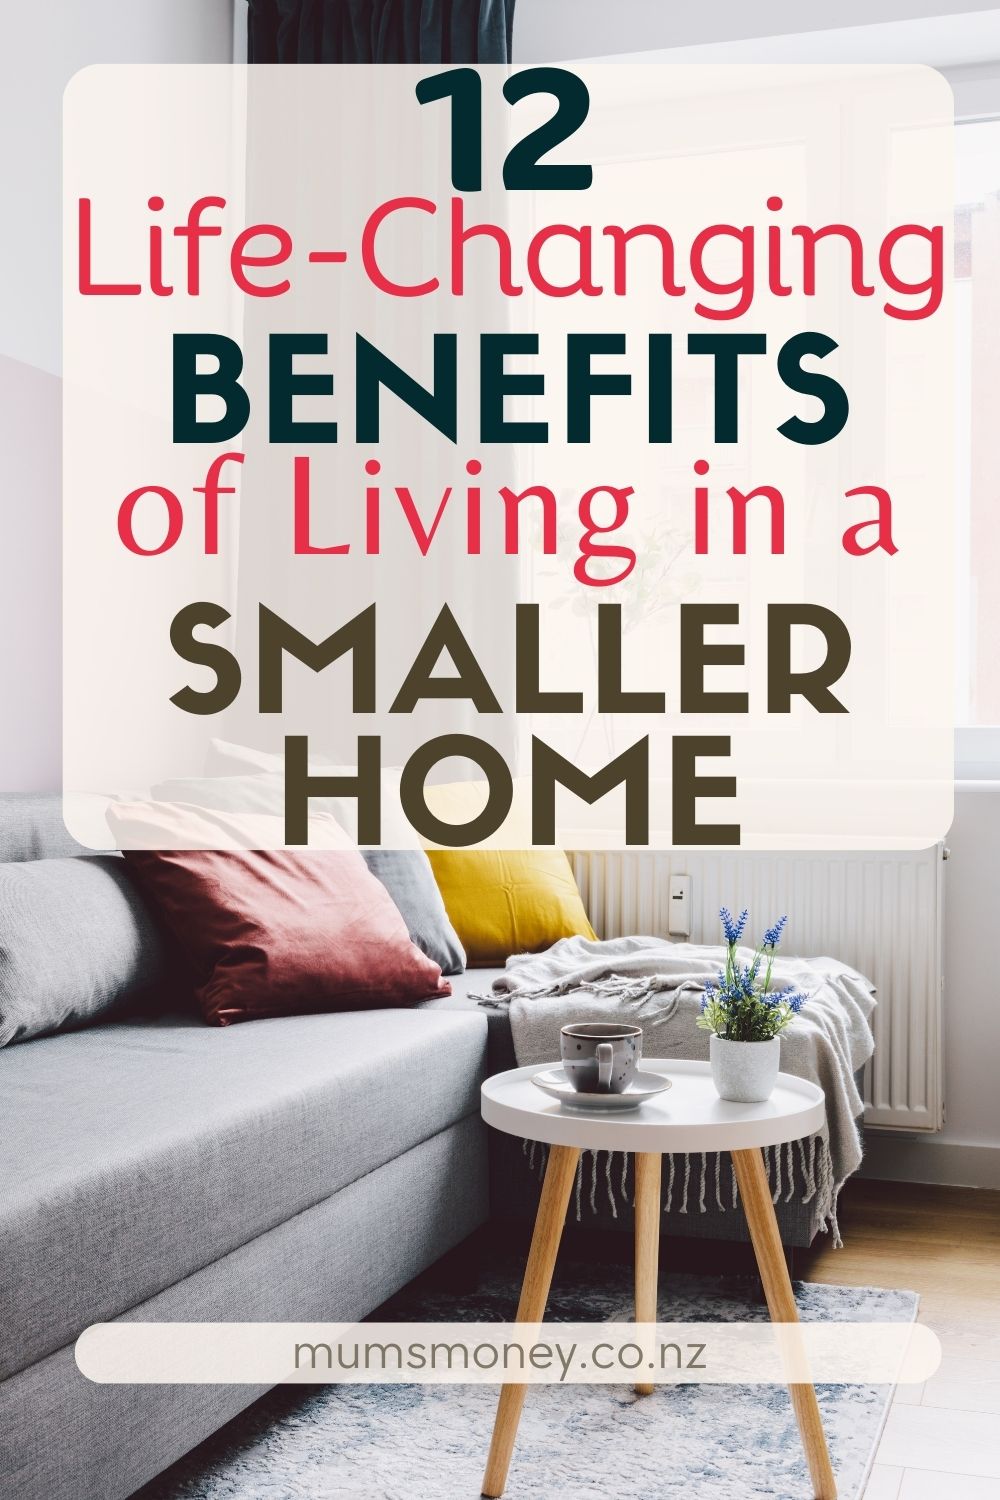 Life-Changing Benefits of Living in a Smaller Home